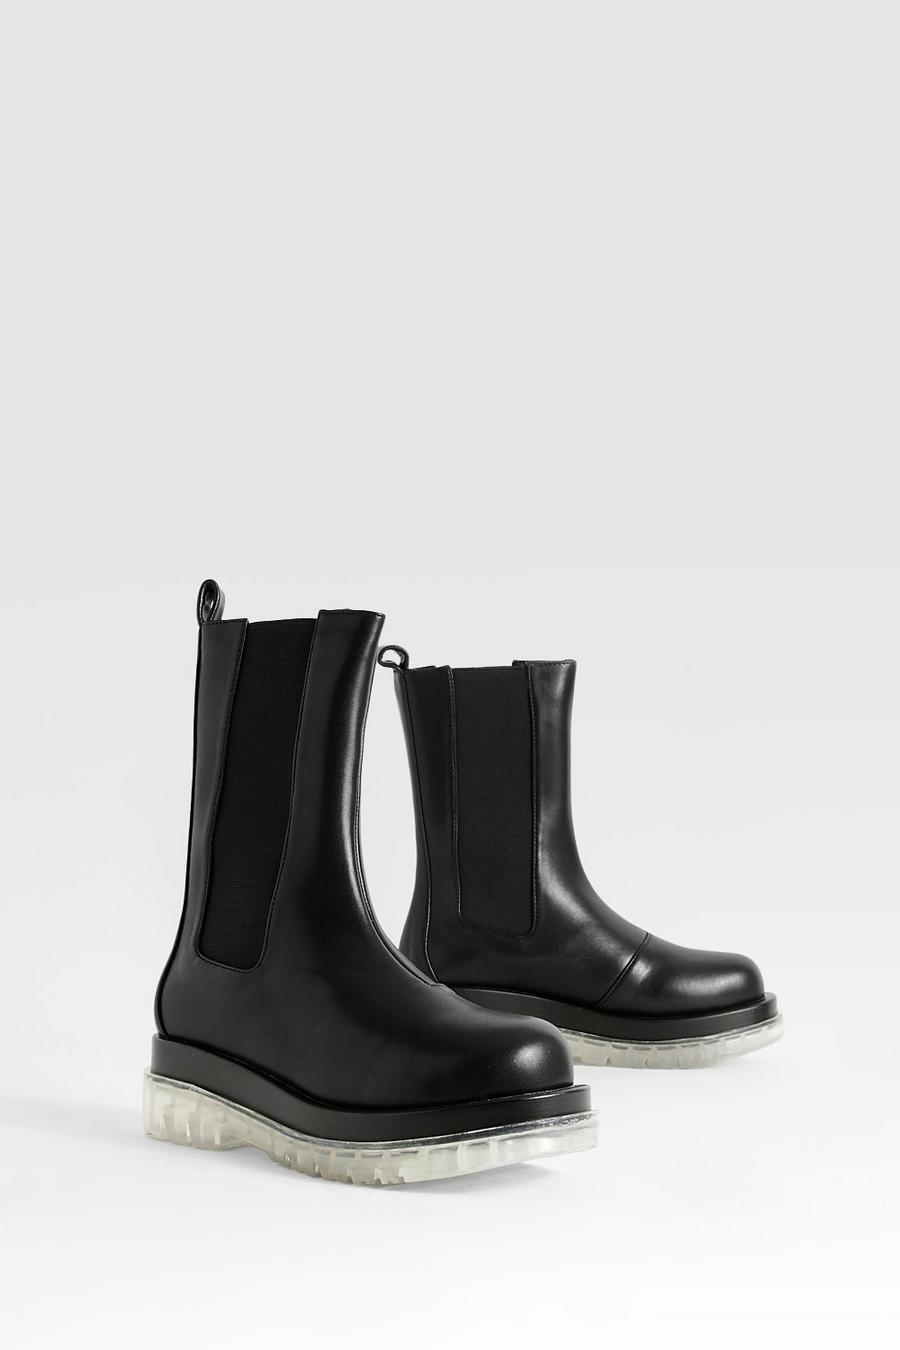 Black Contrast Sole Calf High Chelsea Boots image number 1